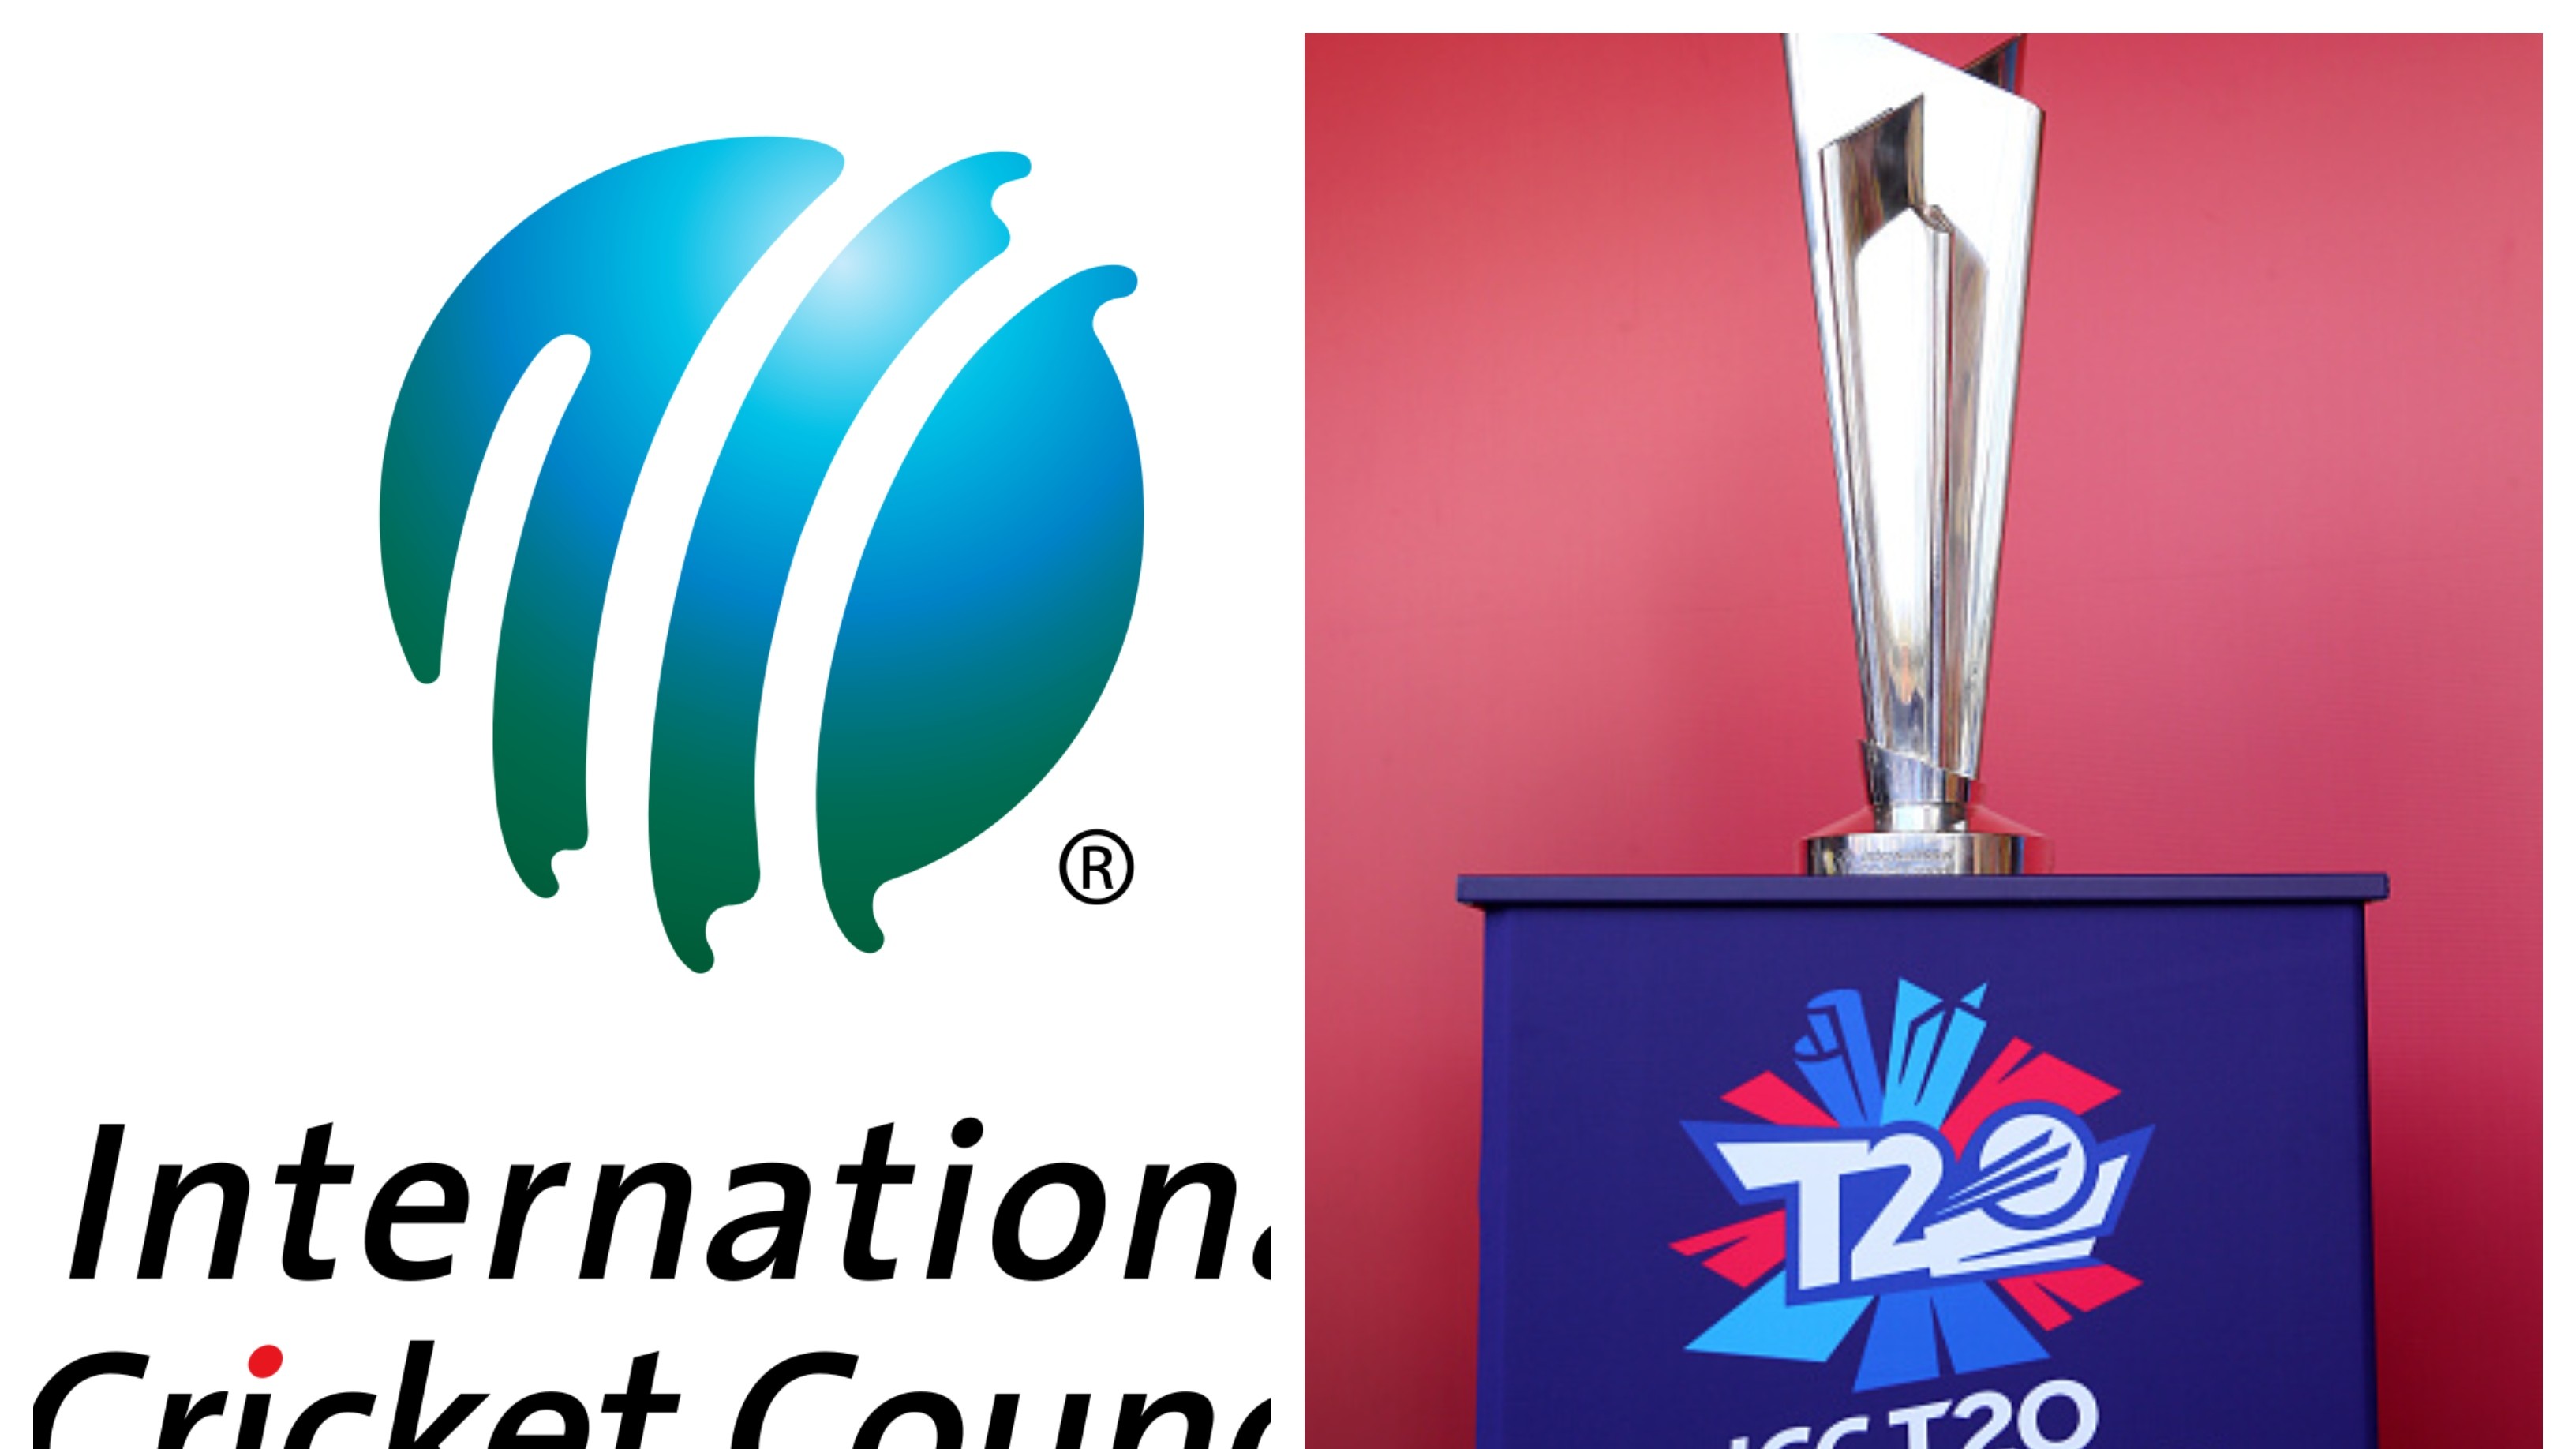 ICC board members may discuss shifting T20 World Cup to 2022, says report 